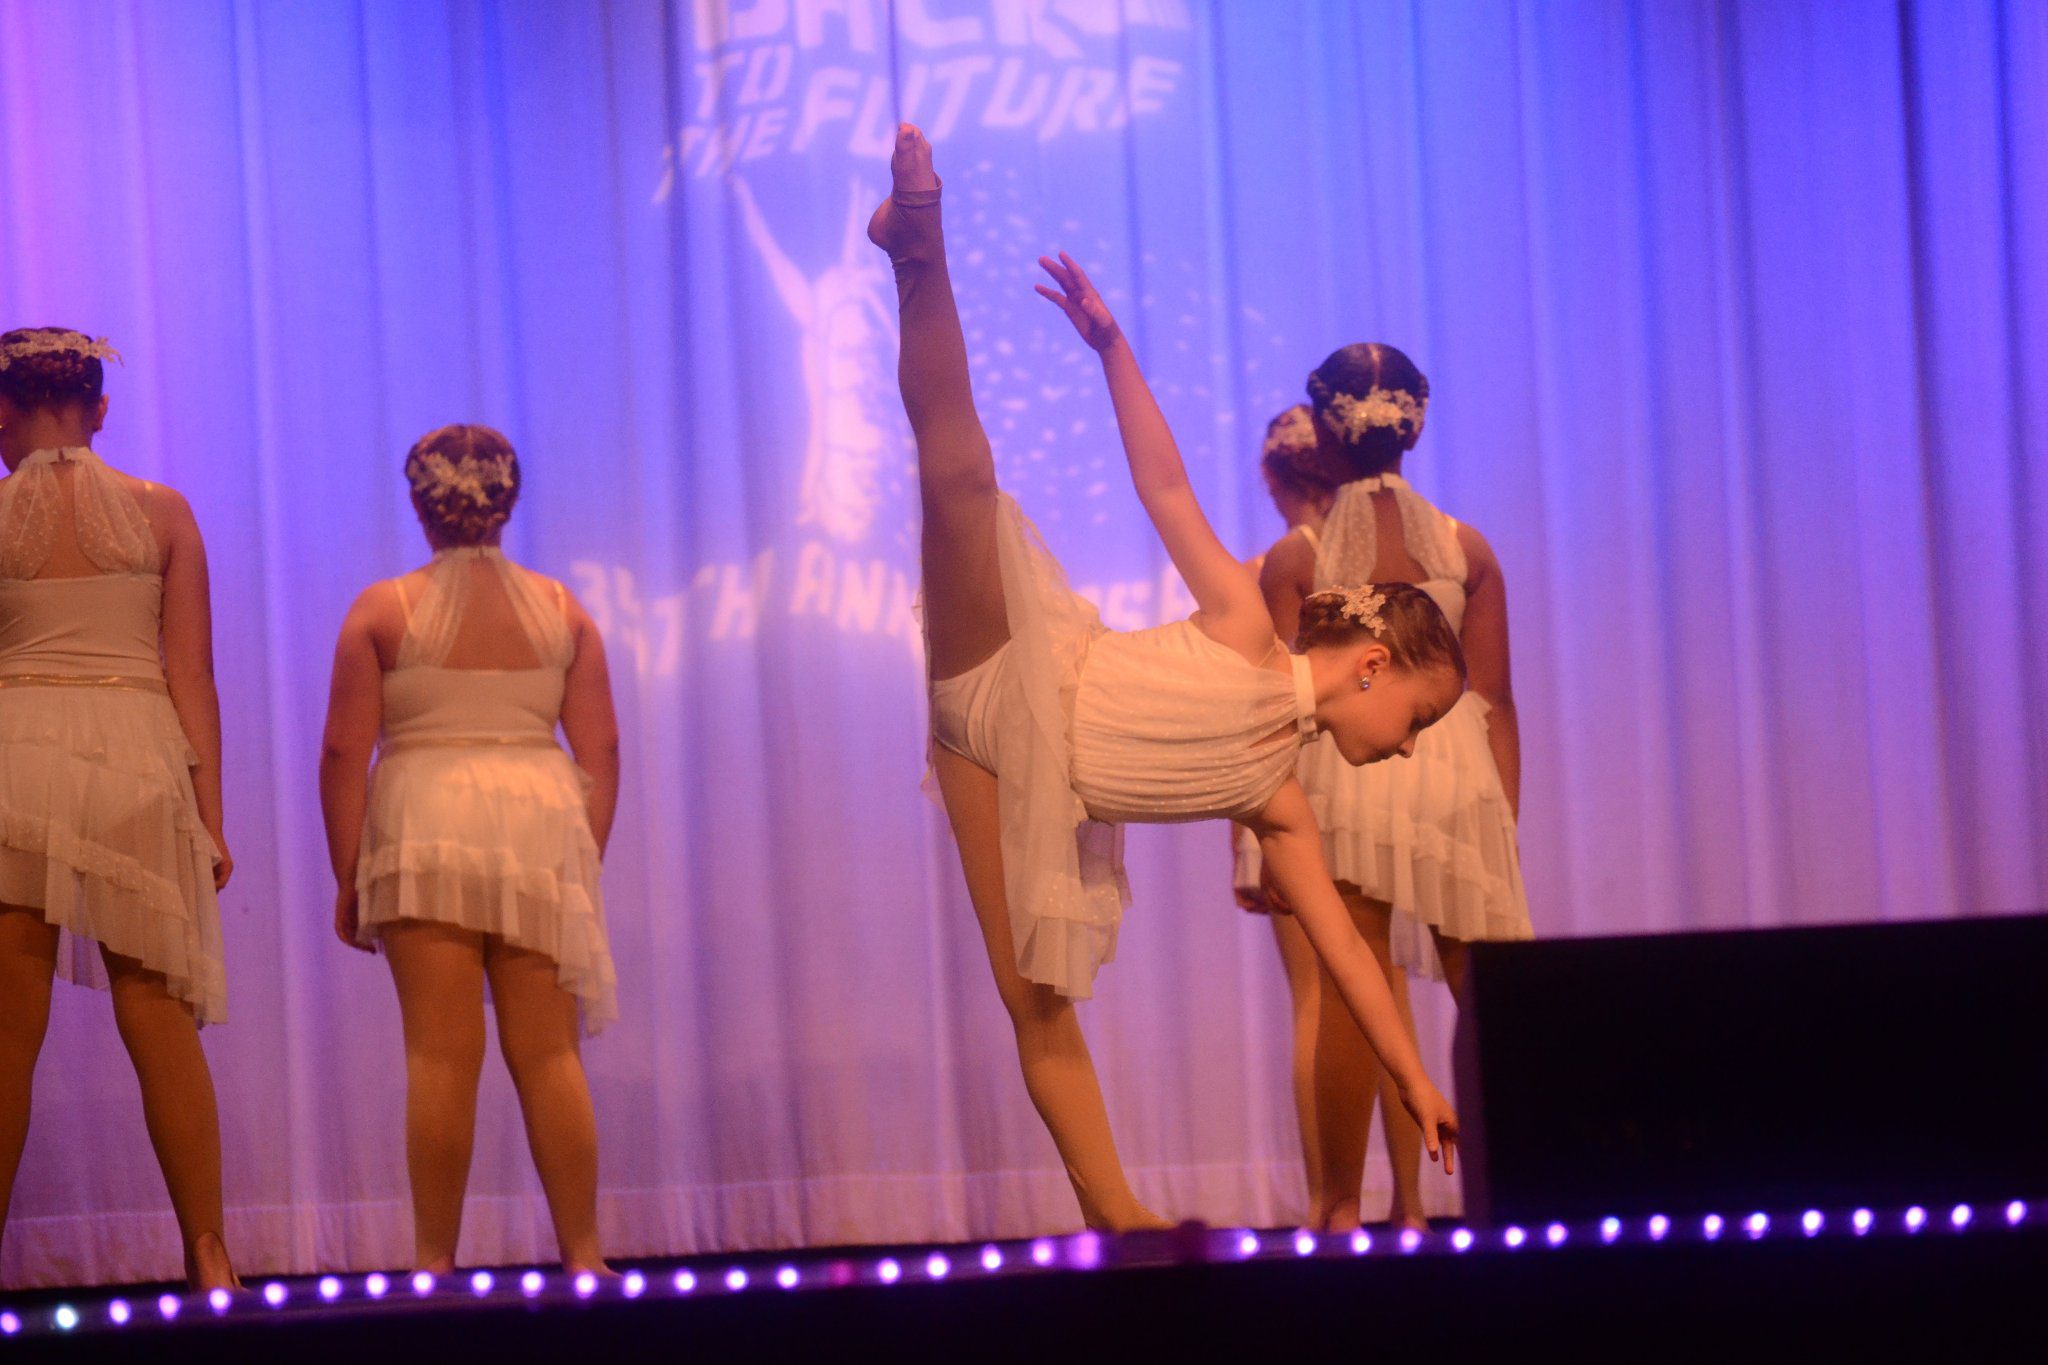 Tilley’s Dance Academy dancers performing a routine on stage